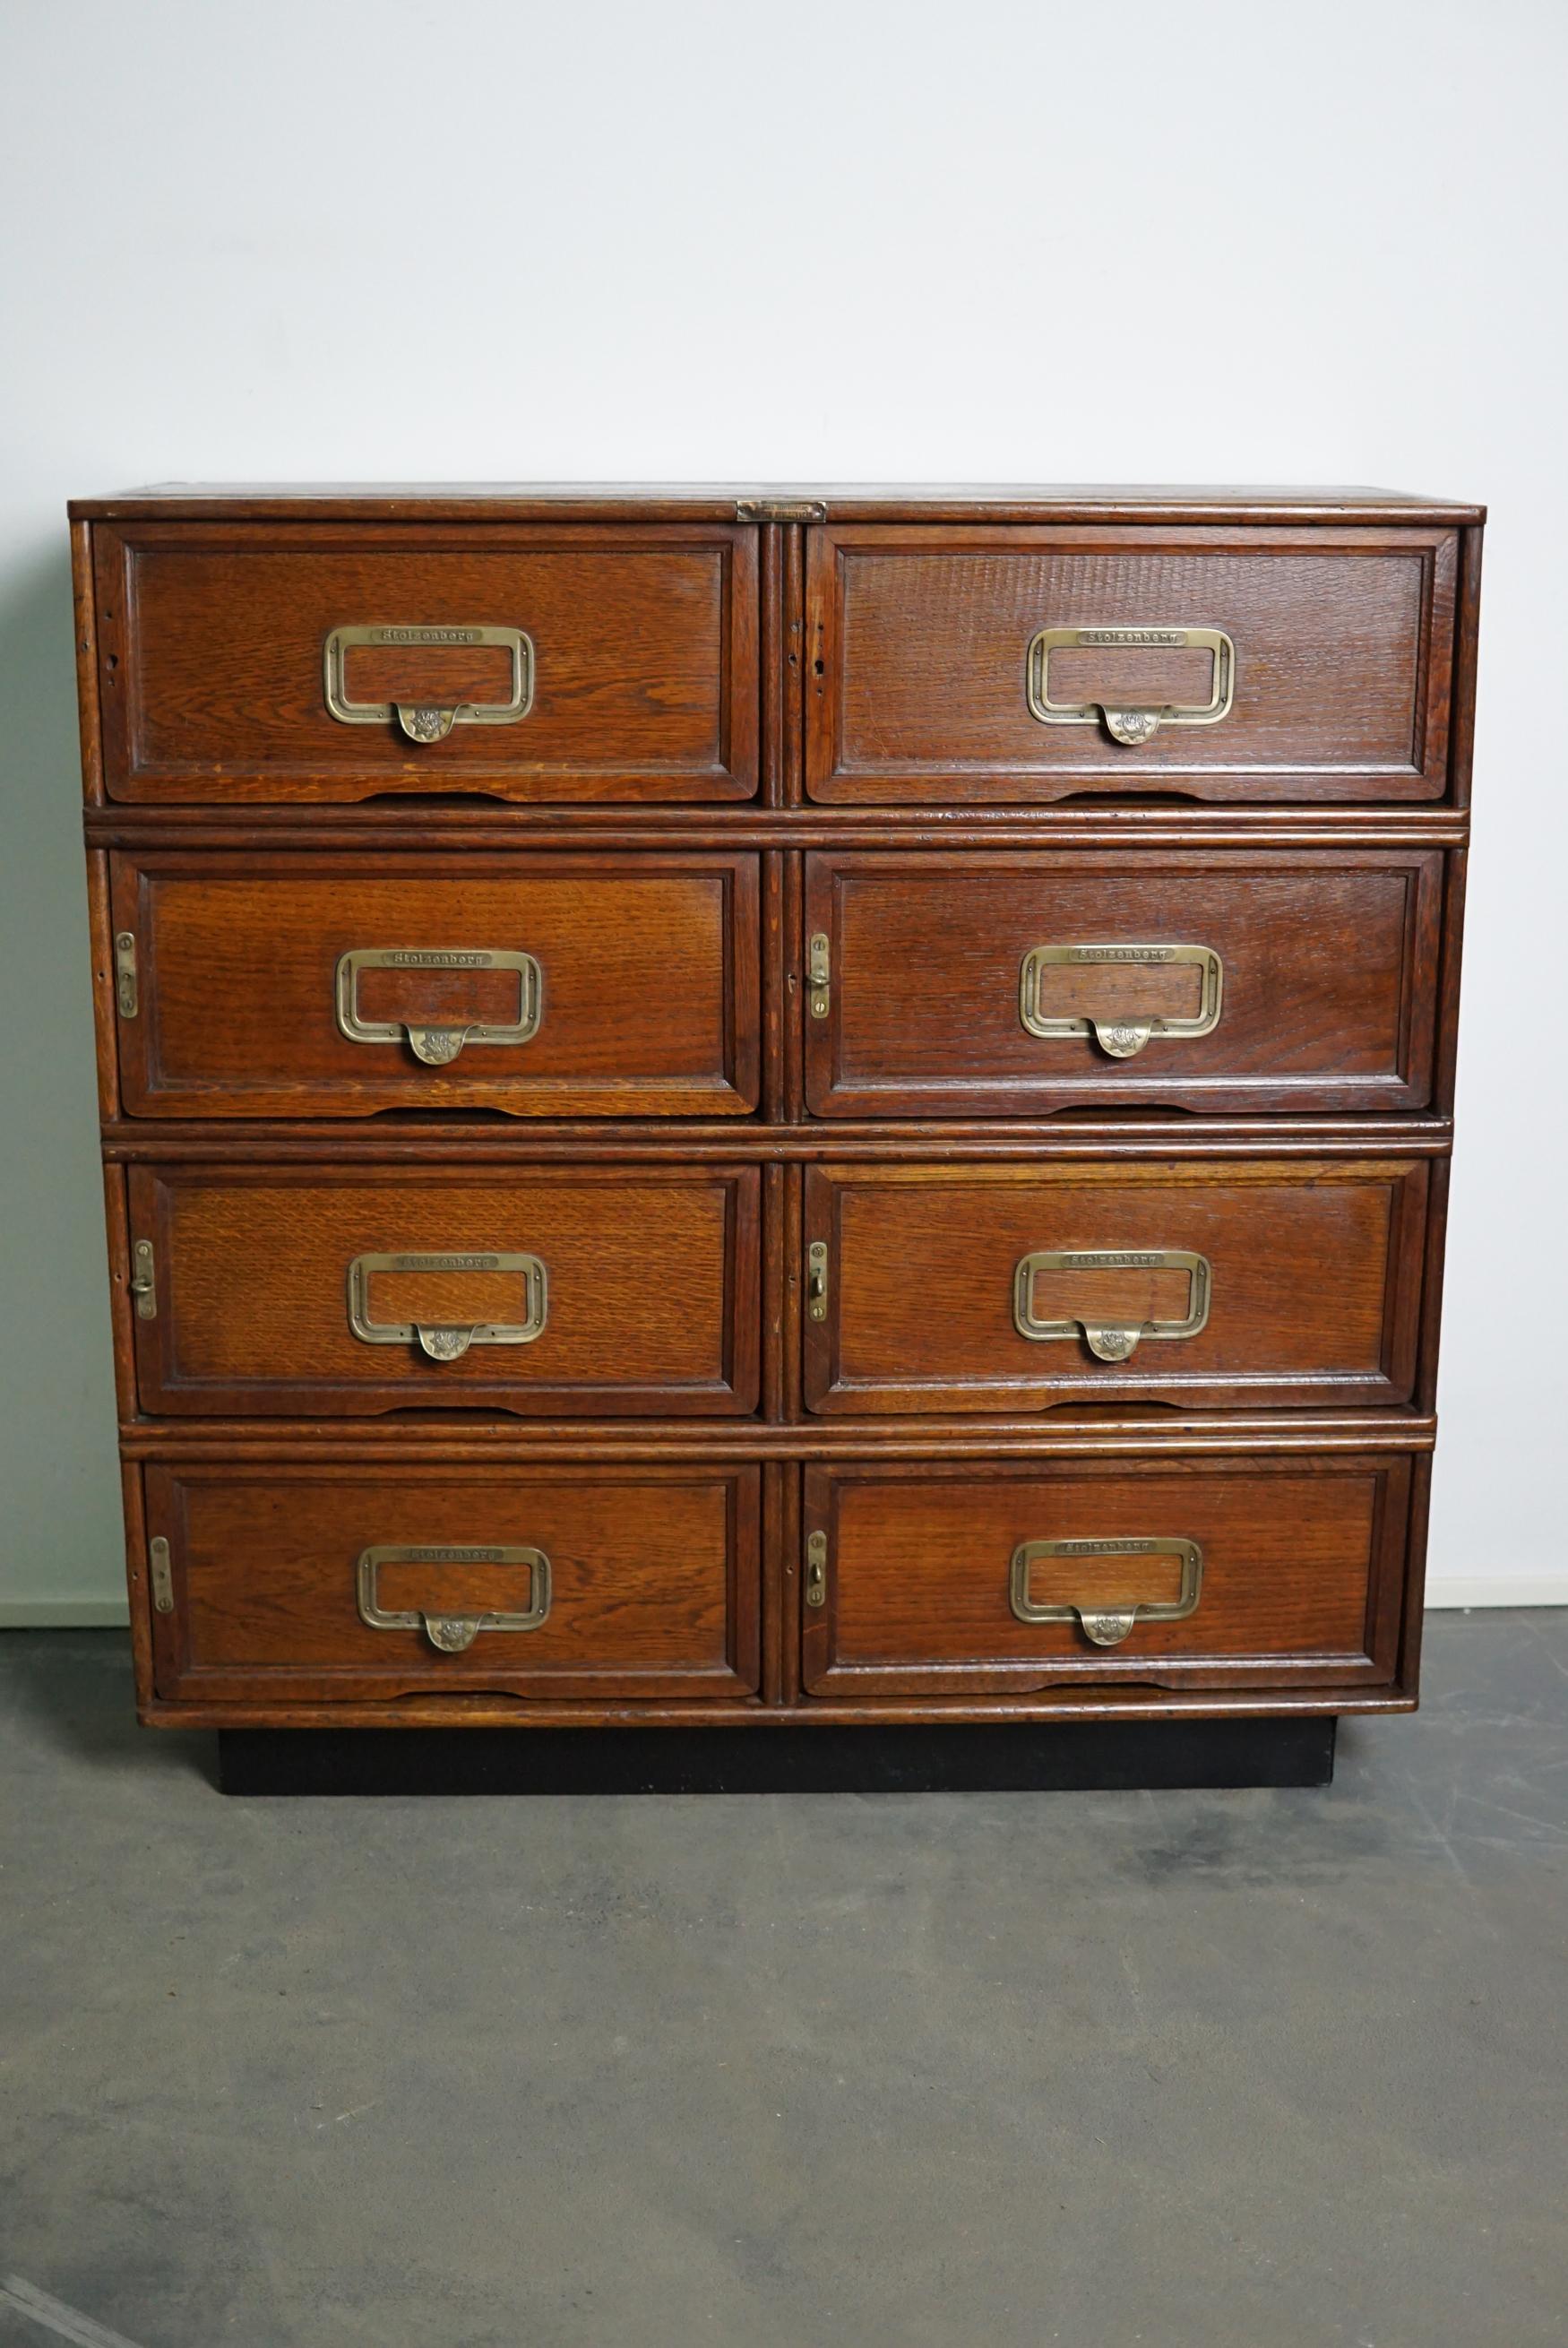 This filing cabinet was made circa 1930s in Germany. It features eight folding doors with very nice pulls / name card holders with the name and company logo of the brand Stolzenberg. The interior dimensions of the compartments are: DWH 30 x 38 x 15